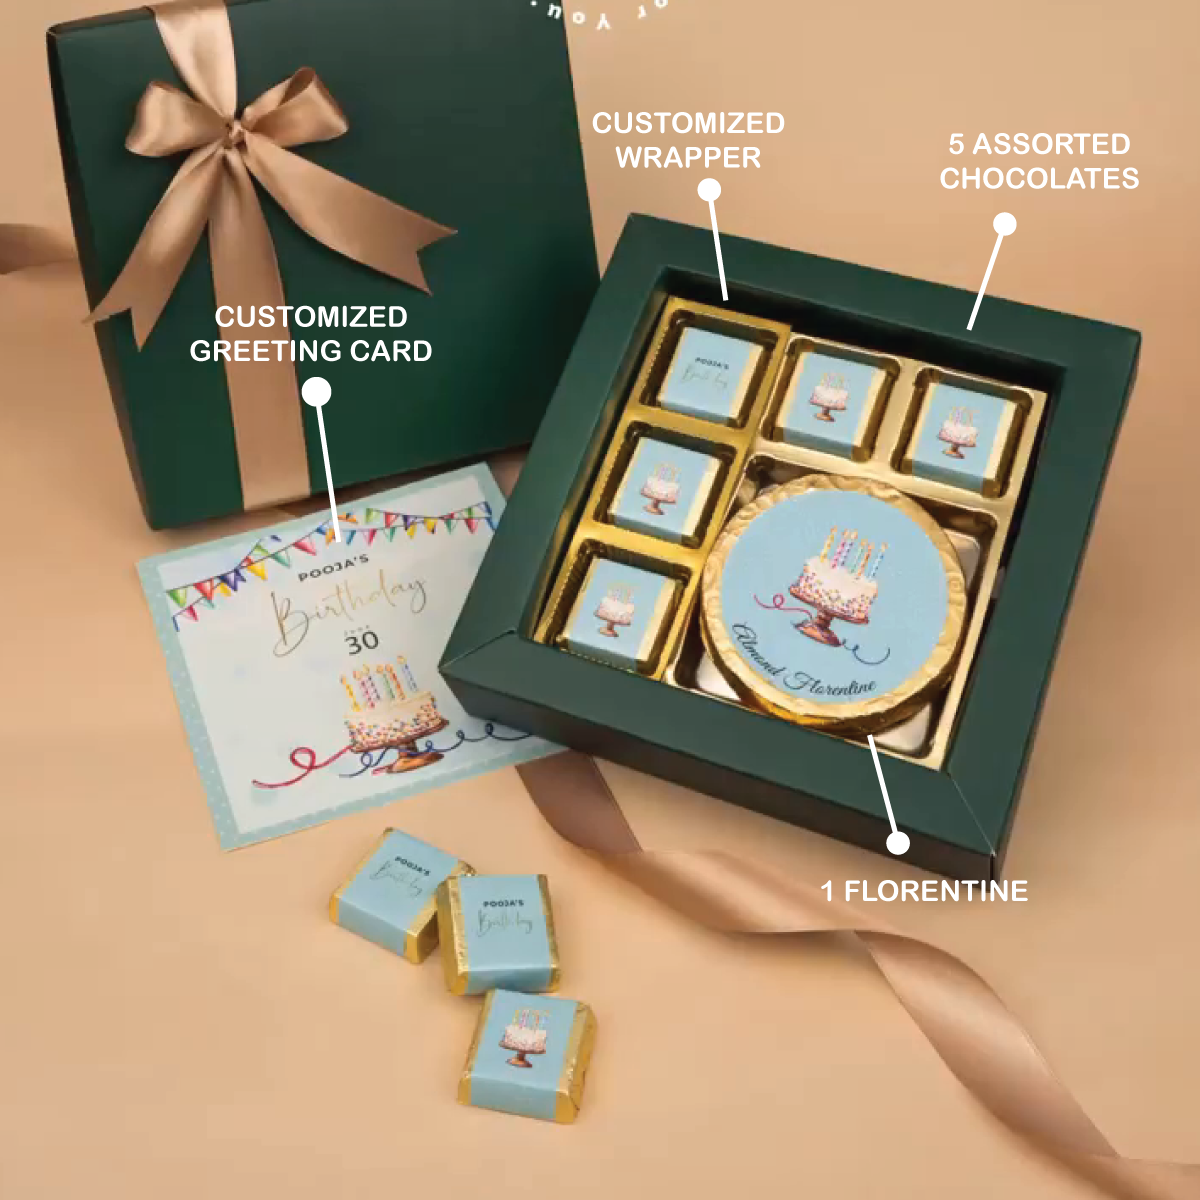 Customized Chocolate Wrapper with Greeting Message Chocolates, and Florentine Combo Gift Set - For Employees, Dealers, Customers, Stakeholders, Personal or Corporate Diwali Gifting CV20